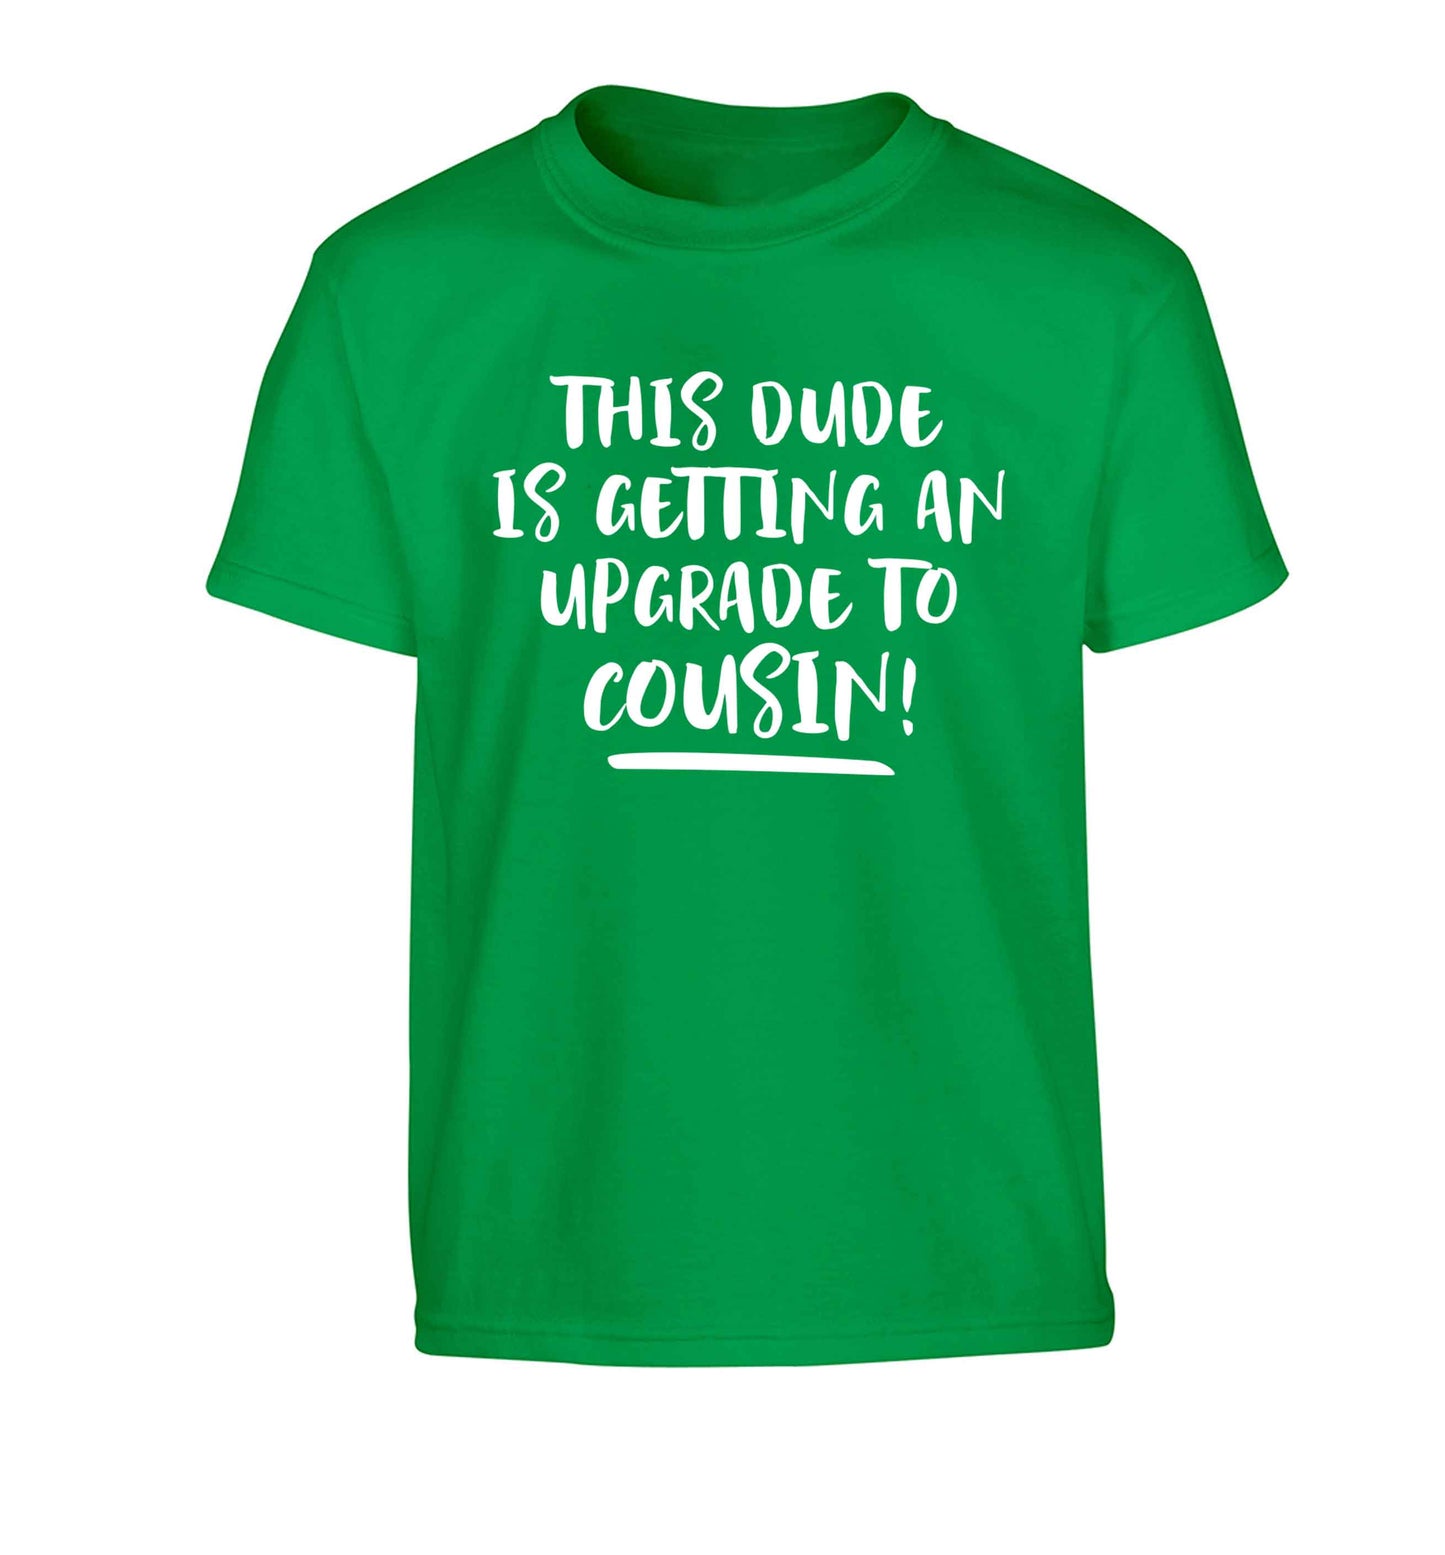 This dude is getting an upgrade to cousin! Children's green Tshirt 12-13 Years